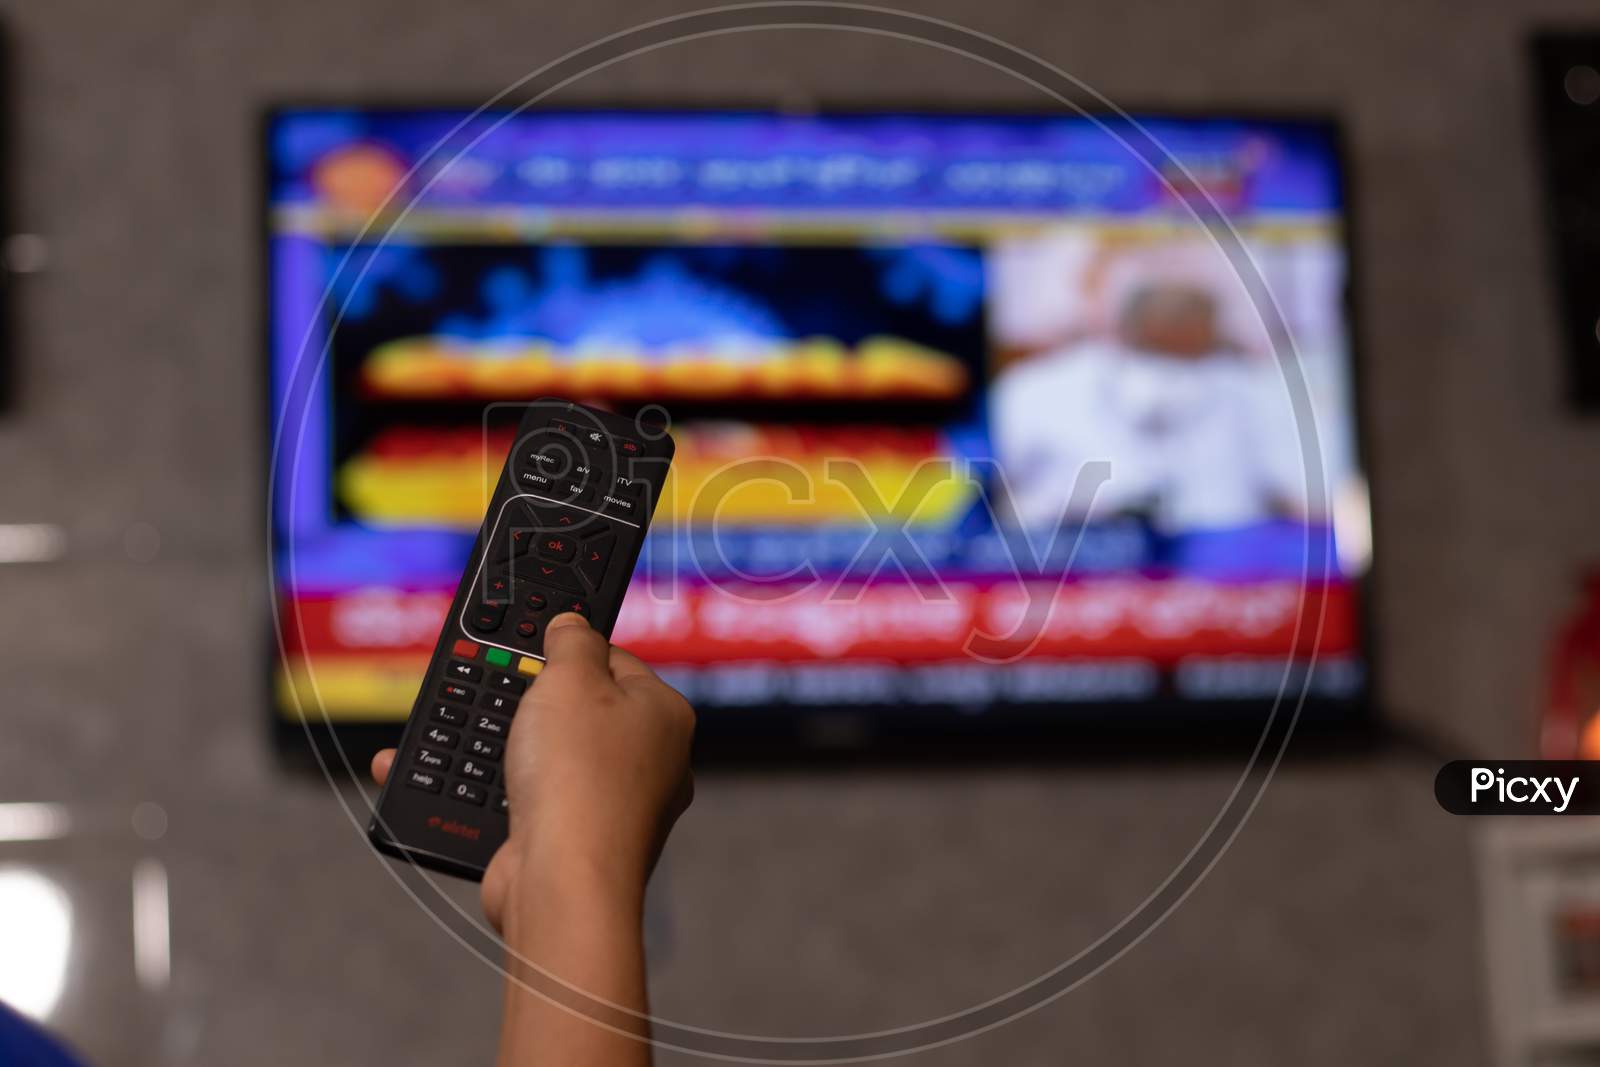 Hands Holding Remote Control Watching News On Tv Screen In Out Of Focus